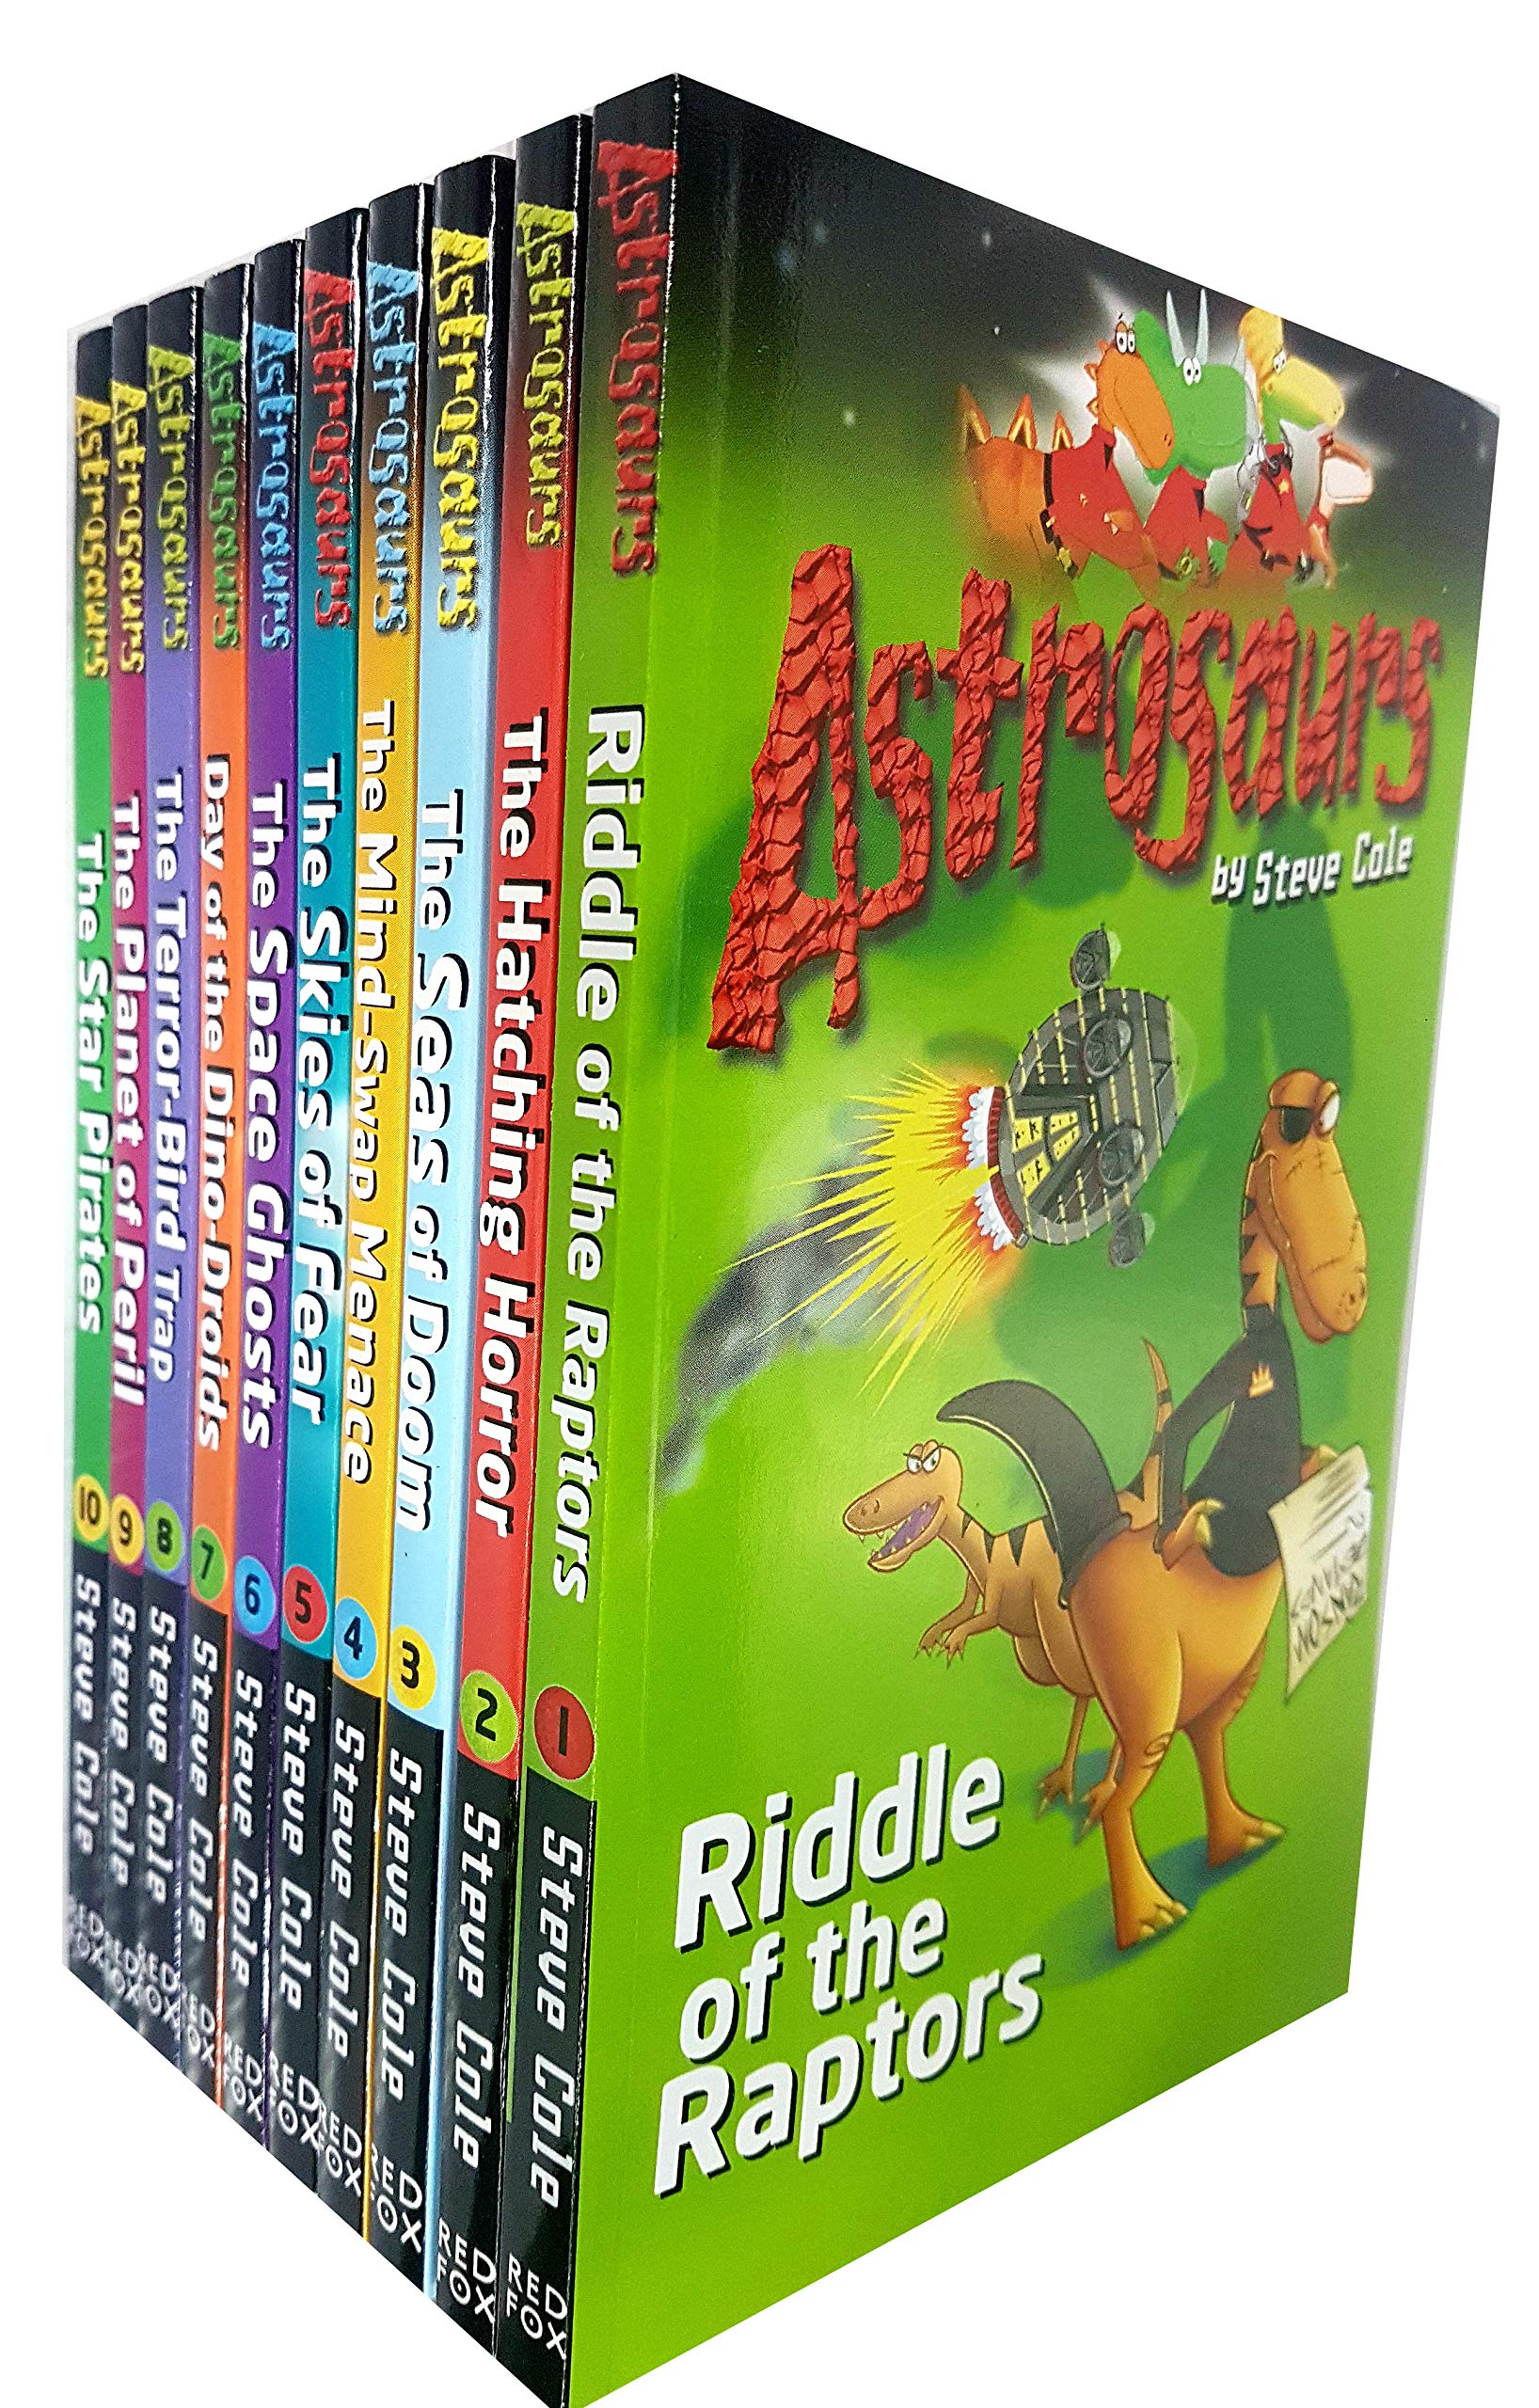 Astrosaurs collection 10 books set by steve cole (Series 1)Riddle Of The Raptors Paperback - Lets Buy Books